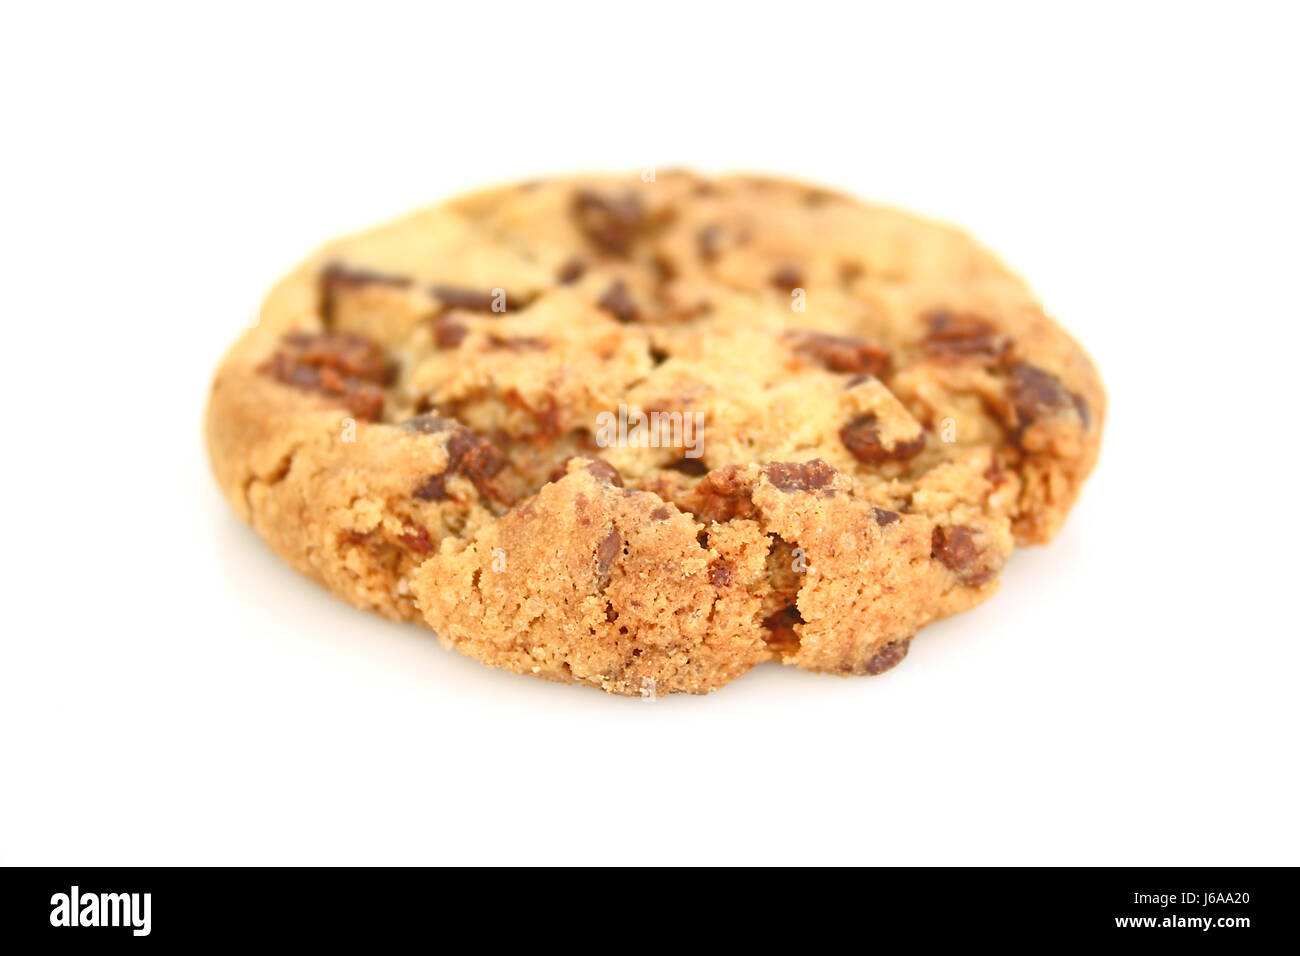 macro close-up macro admission close up view pastry cookie sweetness baked Stock Photo